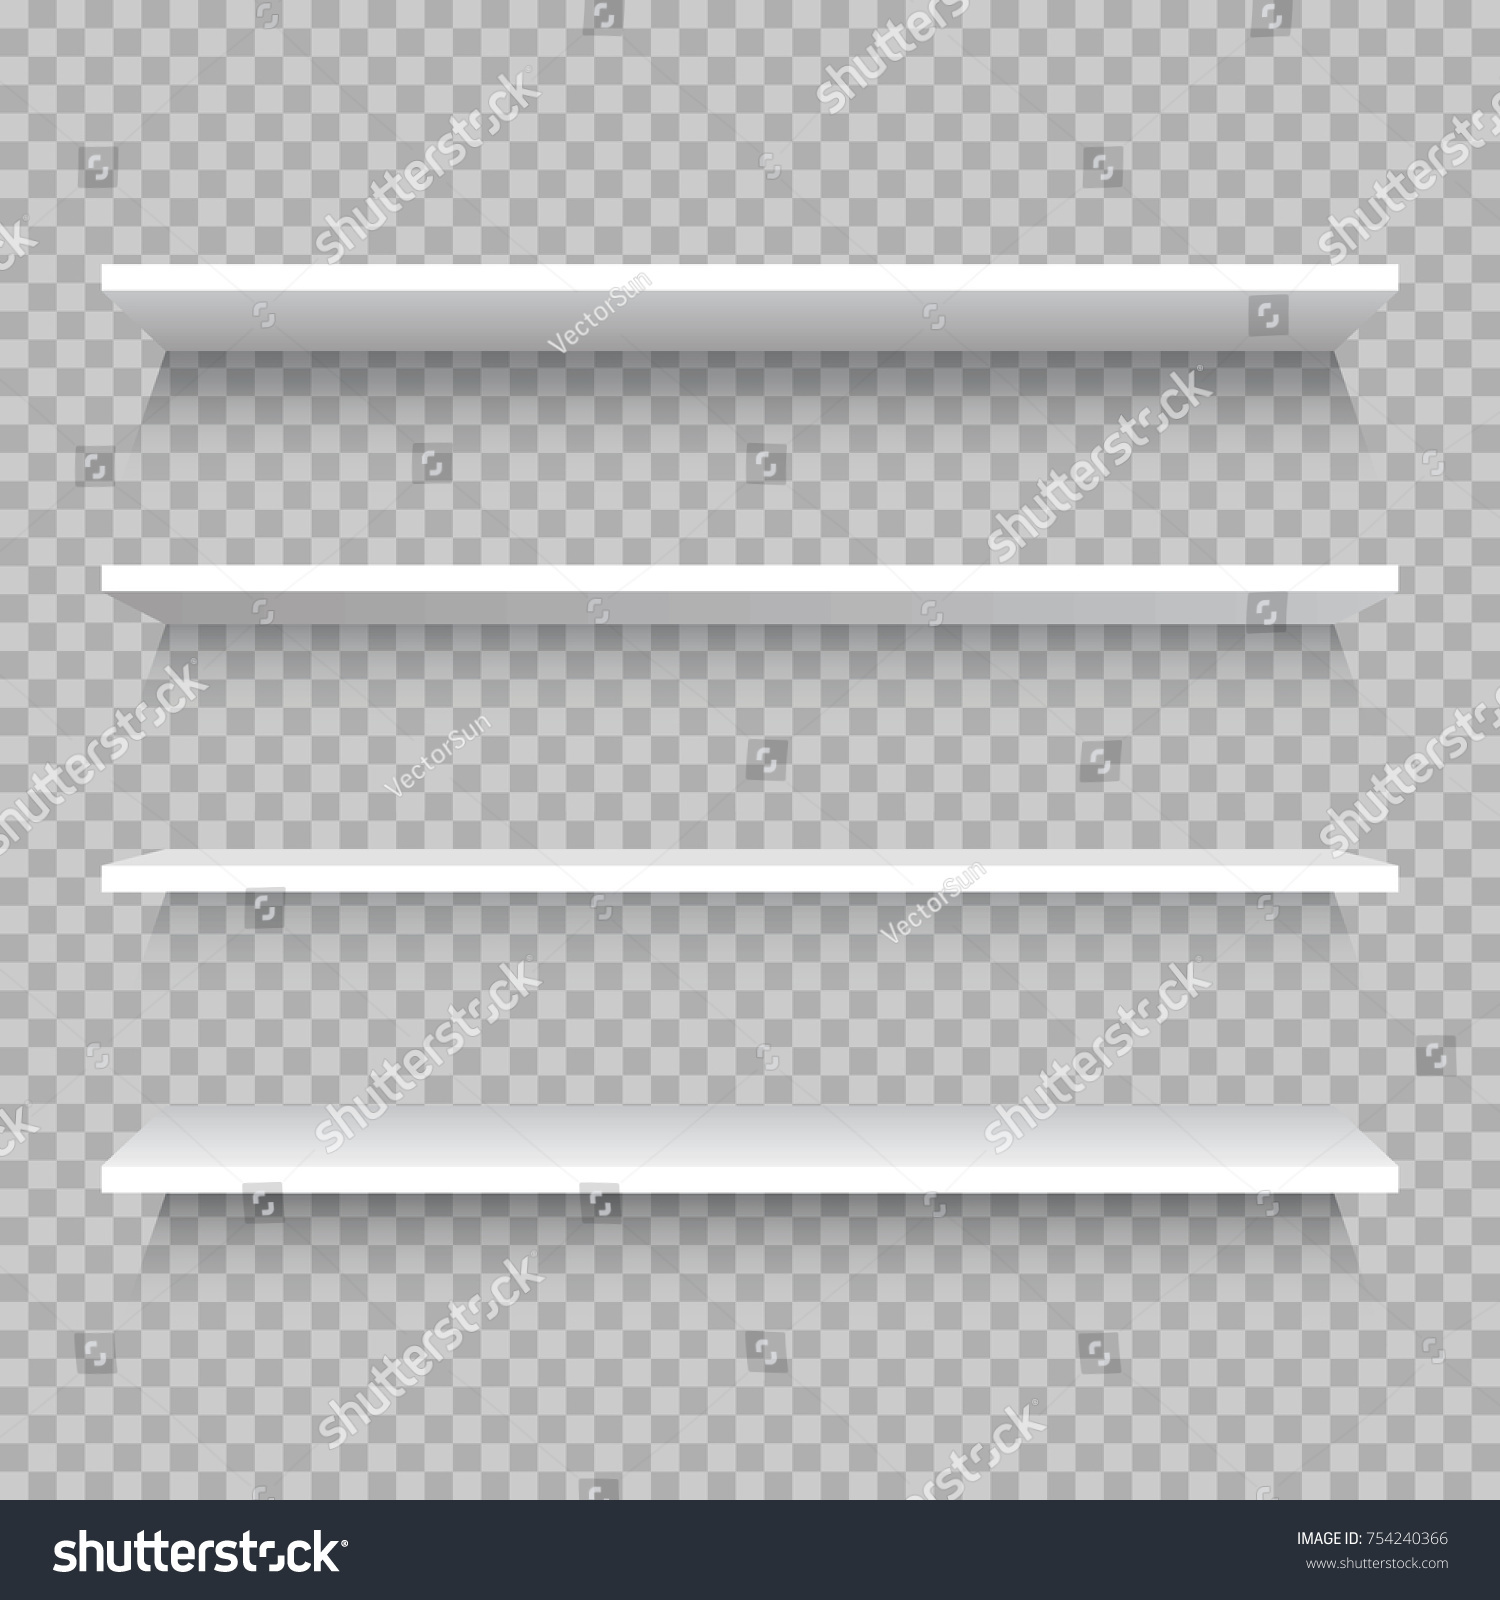 Empty white shop shelf, retail shelves from plywood frame. Realistic vector bookshelf rectangle, 3d store wall display illustration on checkered background #754240366